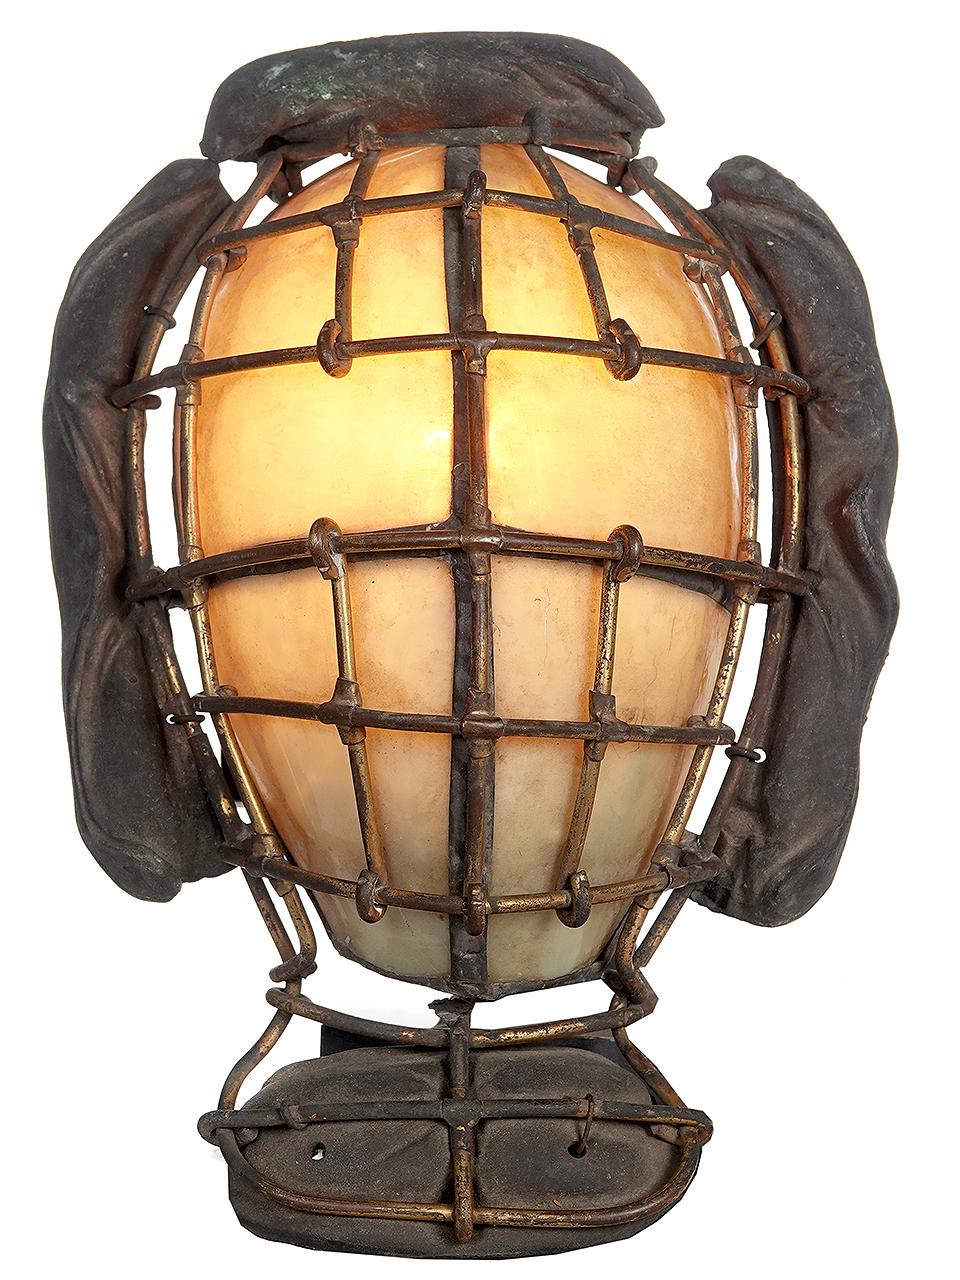 You won't see another pair of these lamps. They were artist/craftsmen made back in the 1930s. Definitely unique and a bit bazaar. The matching pair started life early baseball catchers masks. The glass behind the mask is made from 4 pieces of leaded